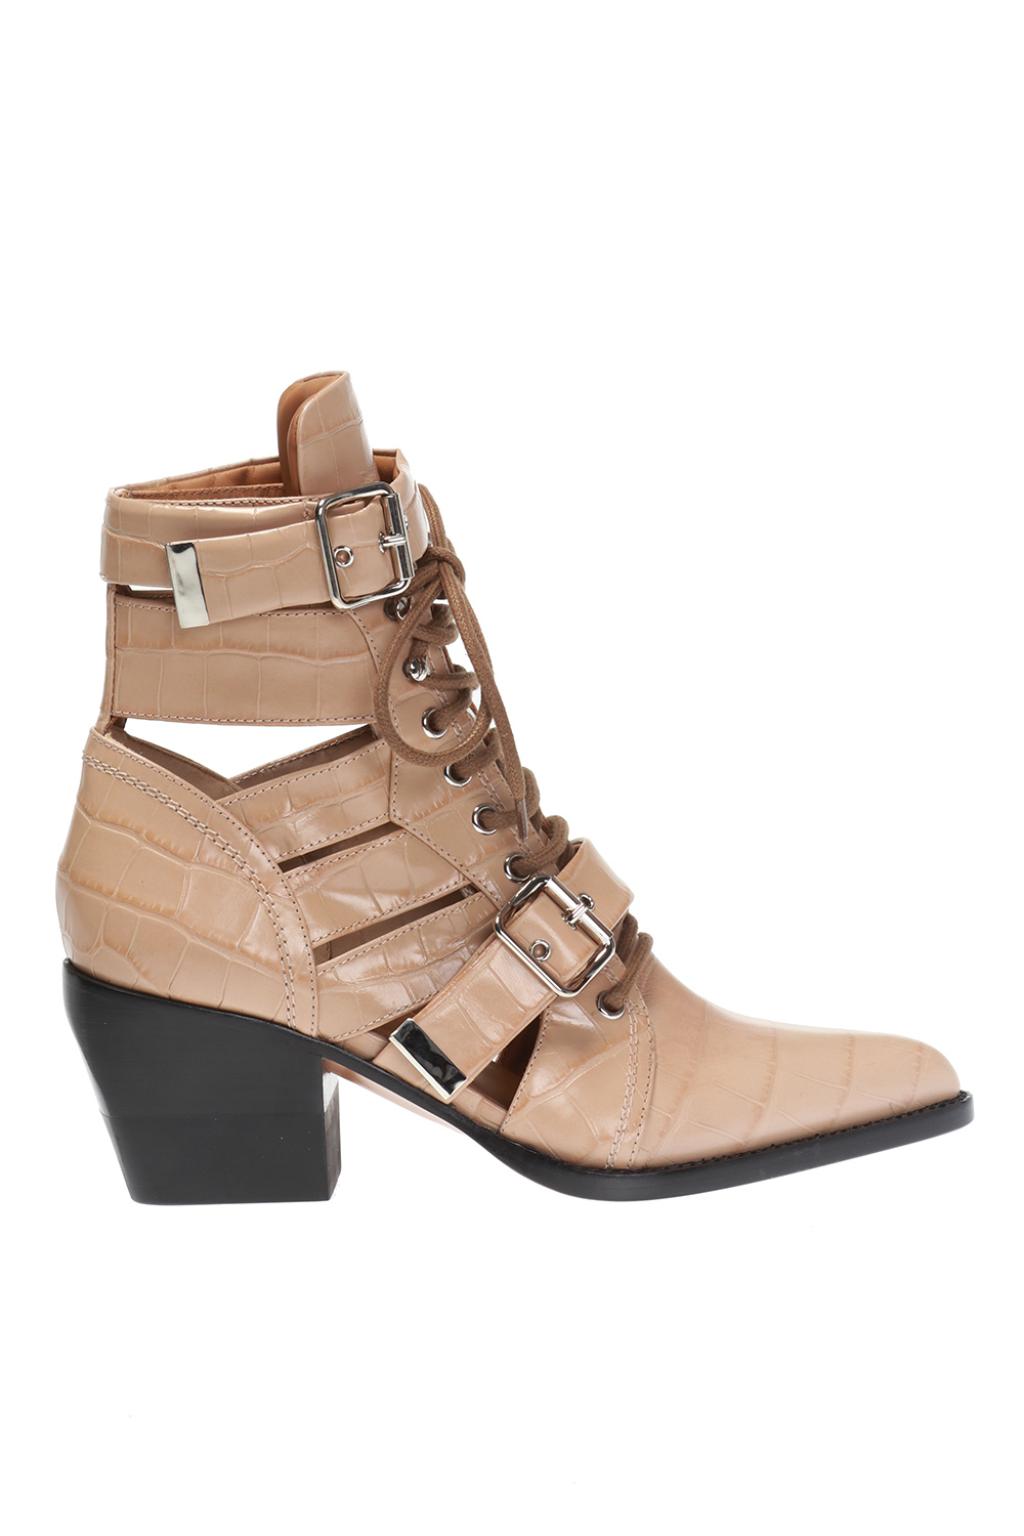 chloe cut out boots